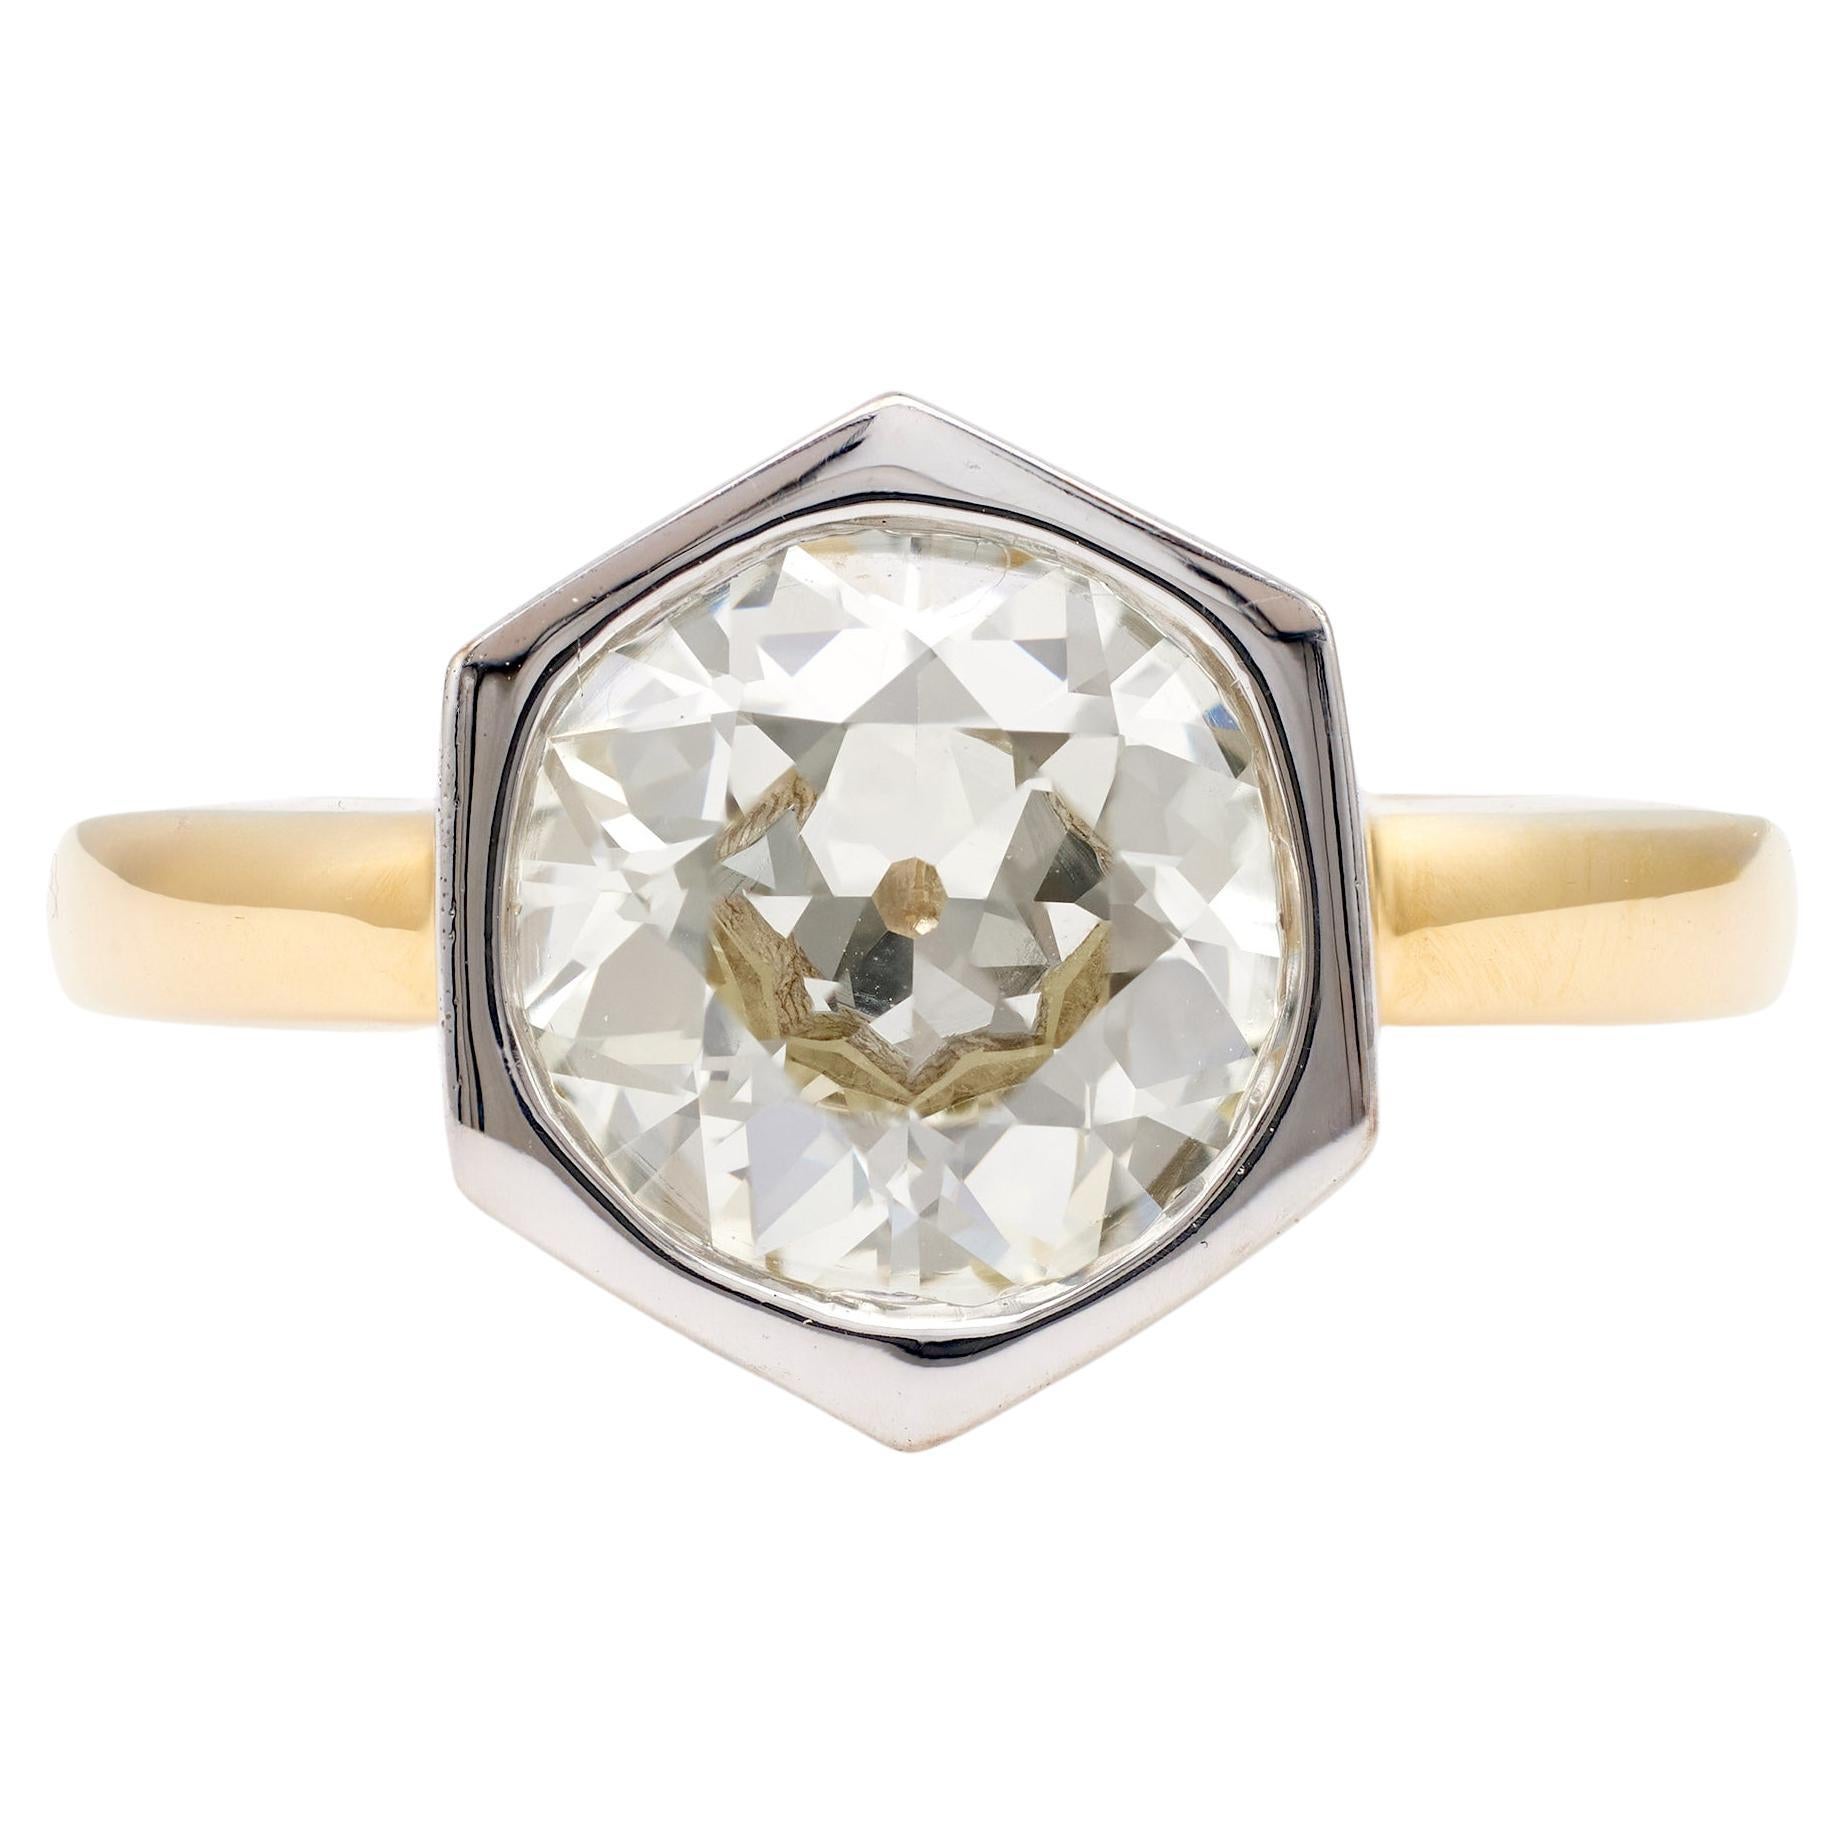 French GIA 3.21 Carat Old European Cut Diamond 18k Gold Solitaire Ring For Sale